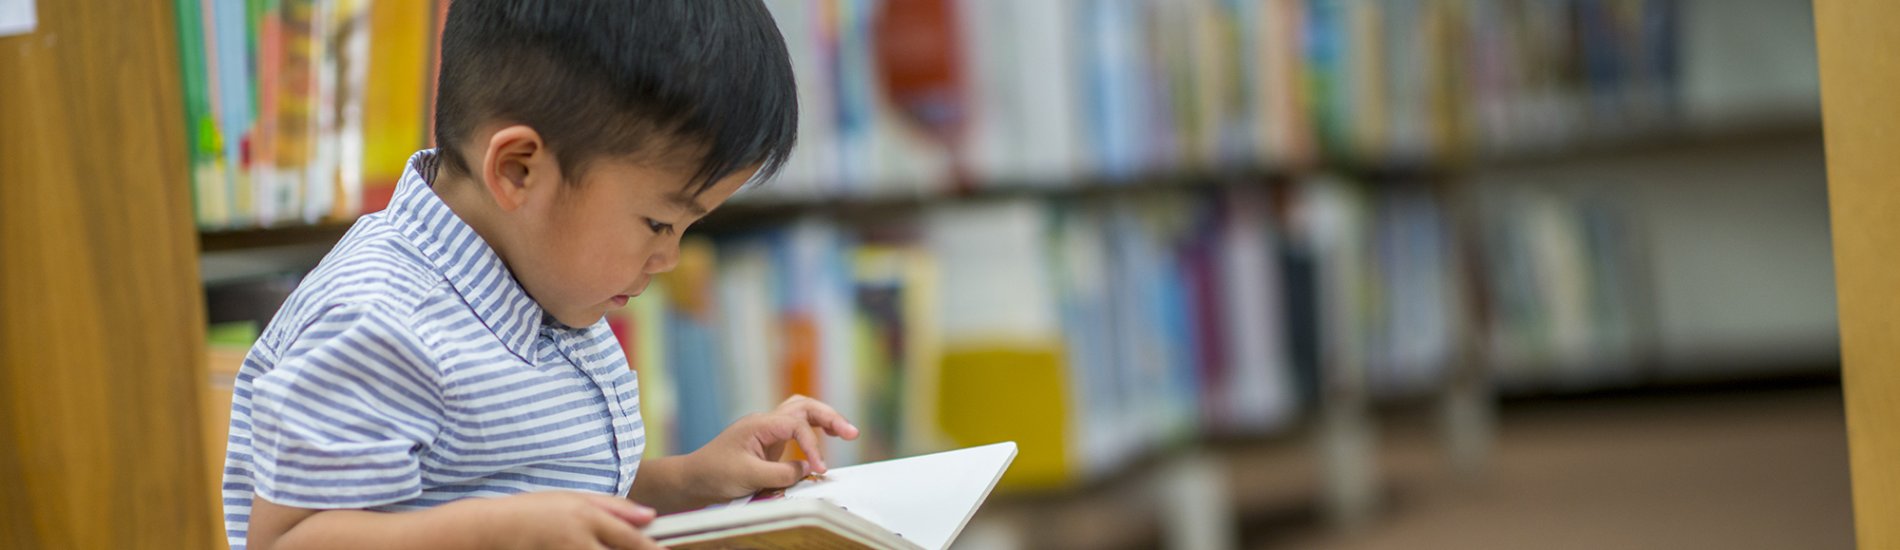 Young child reading a book in a library.